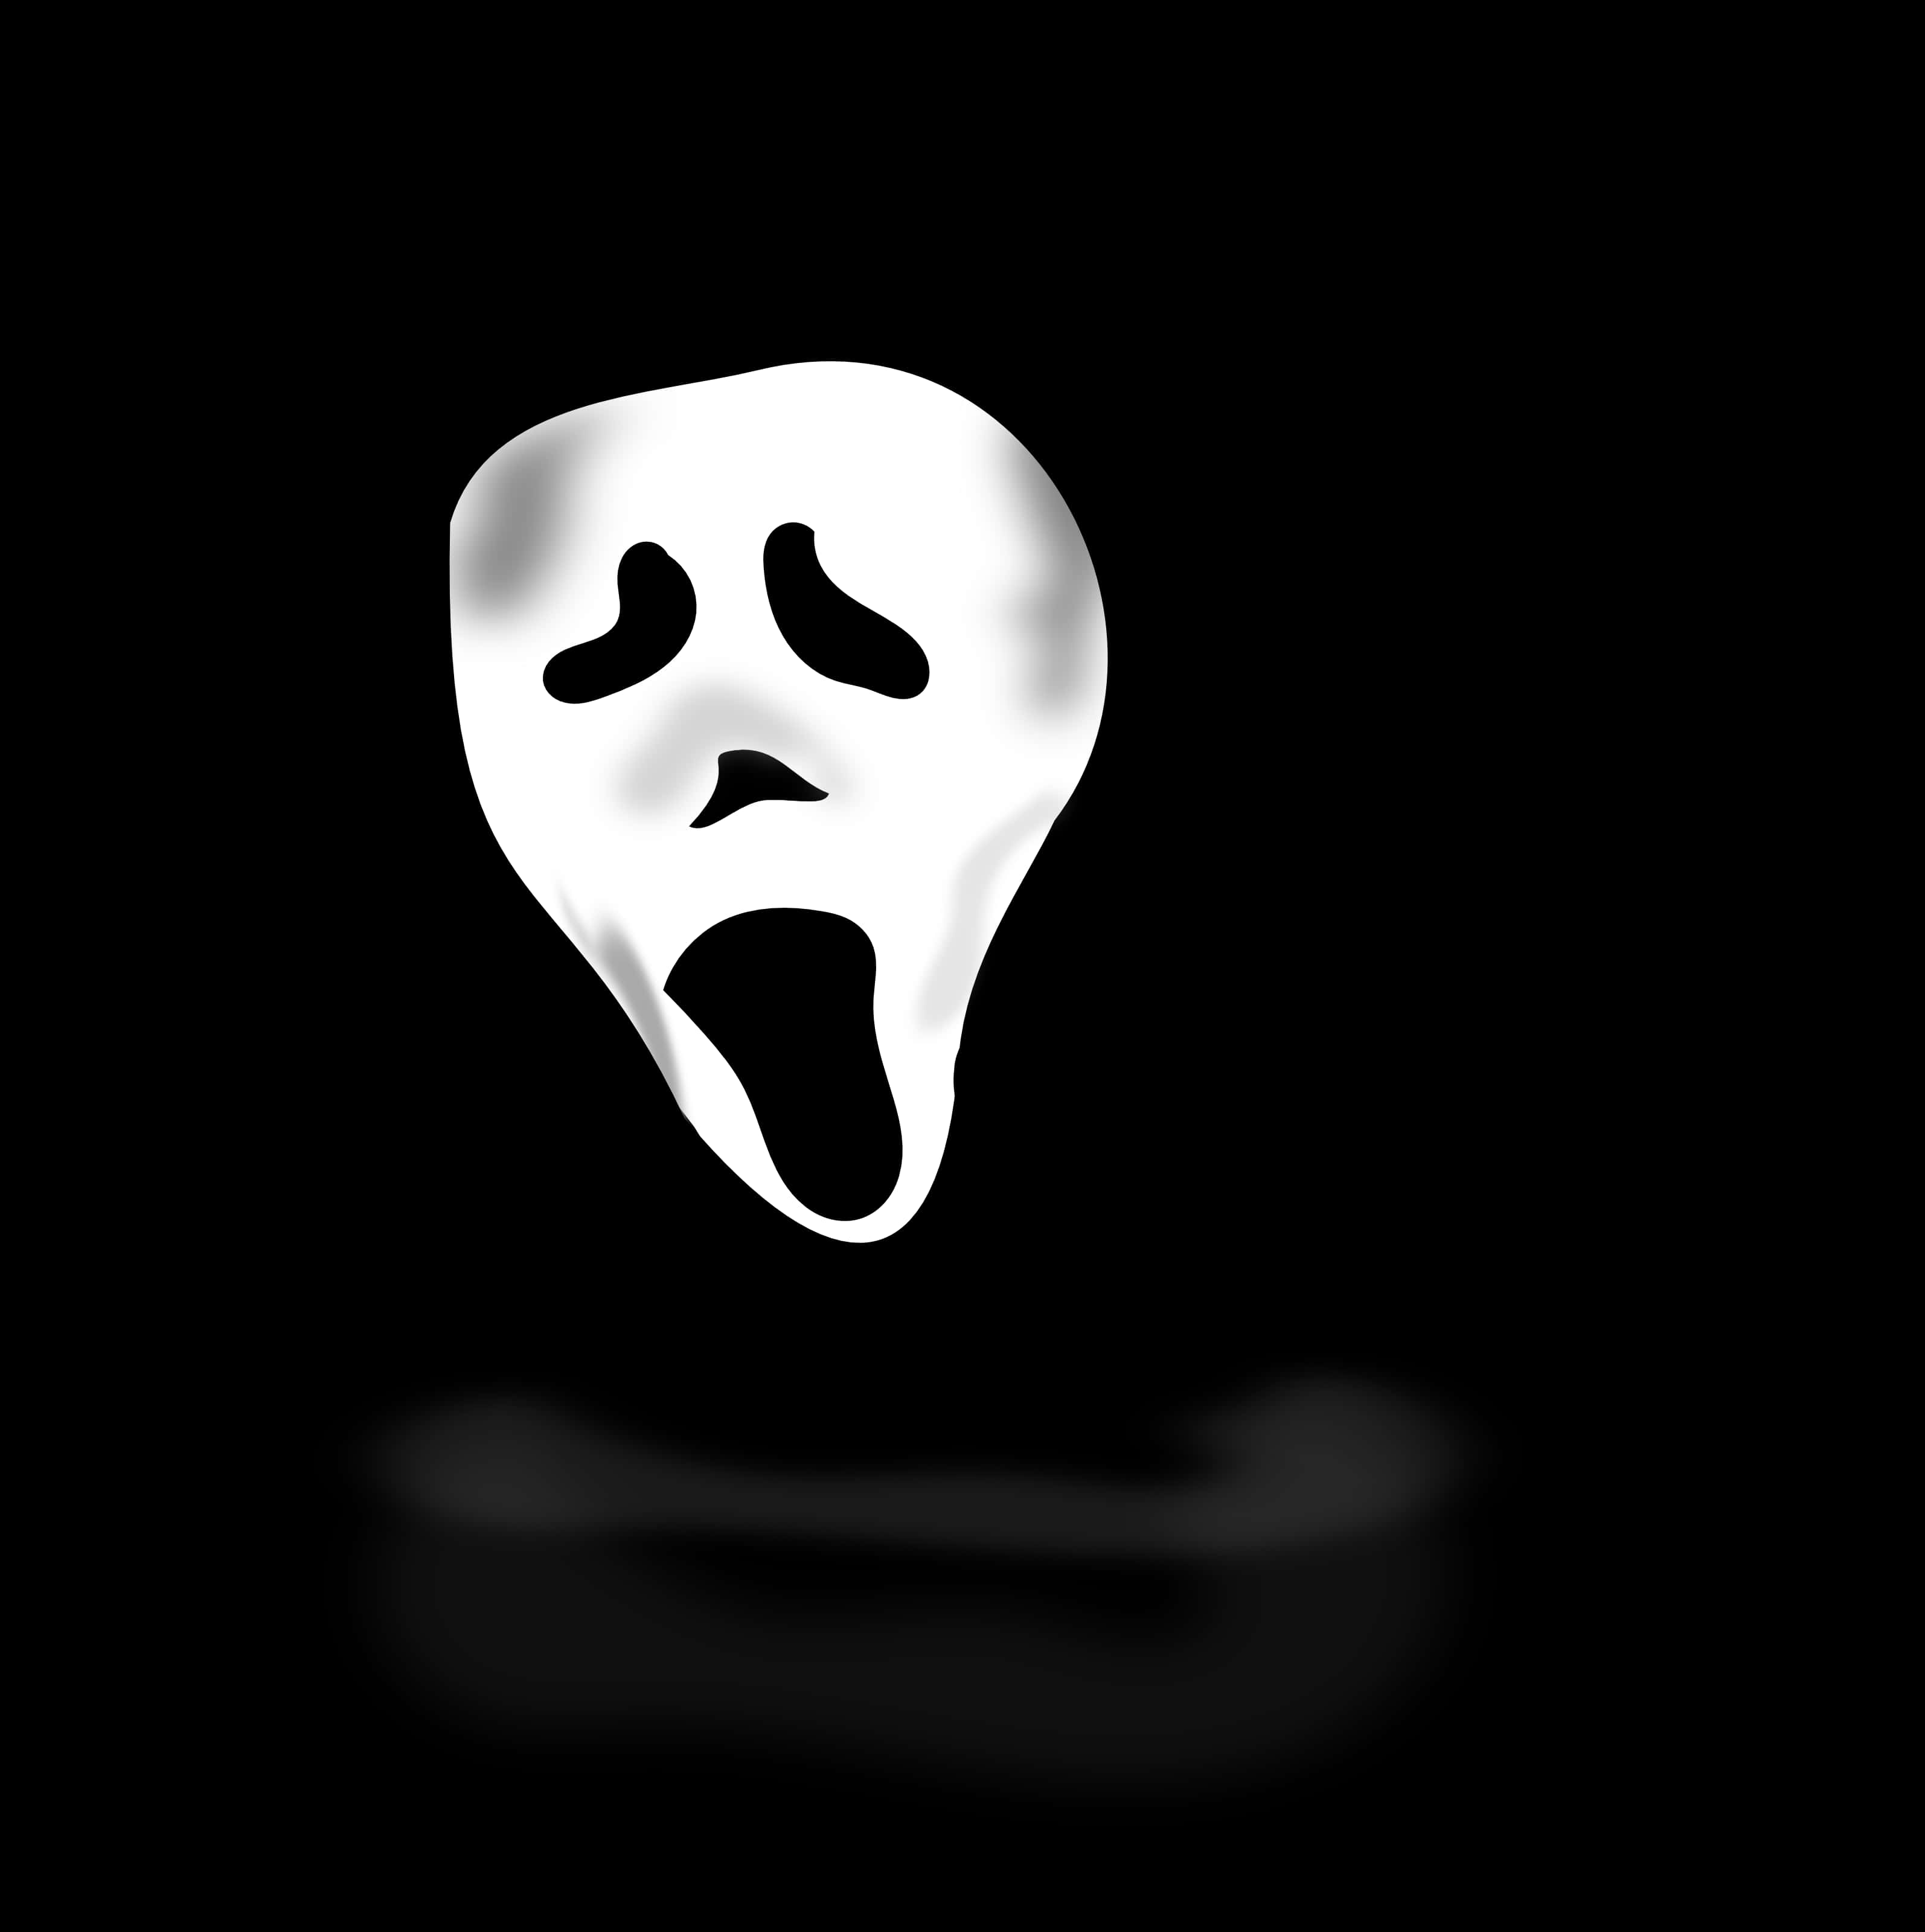 Spooky Ghost Face Graphic